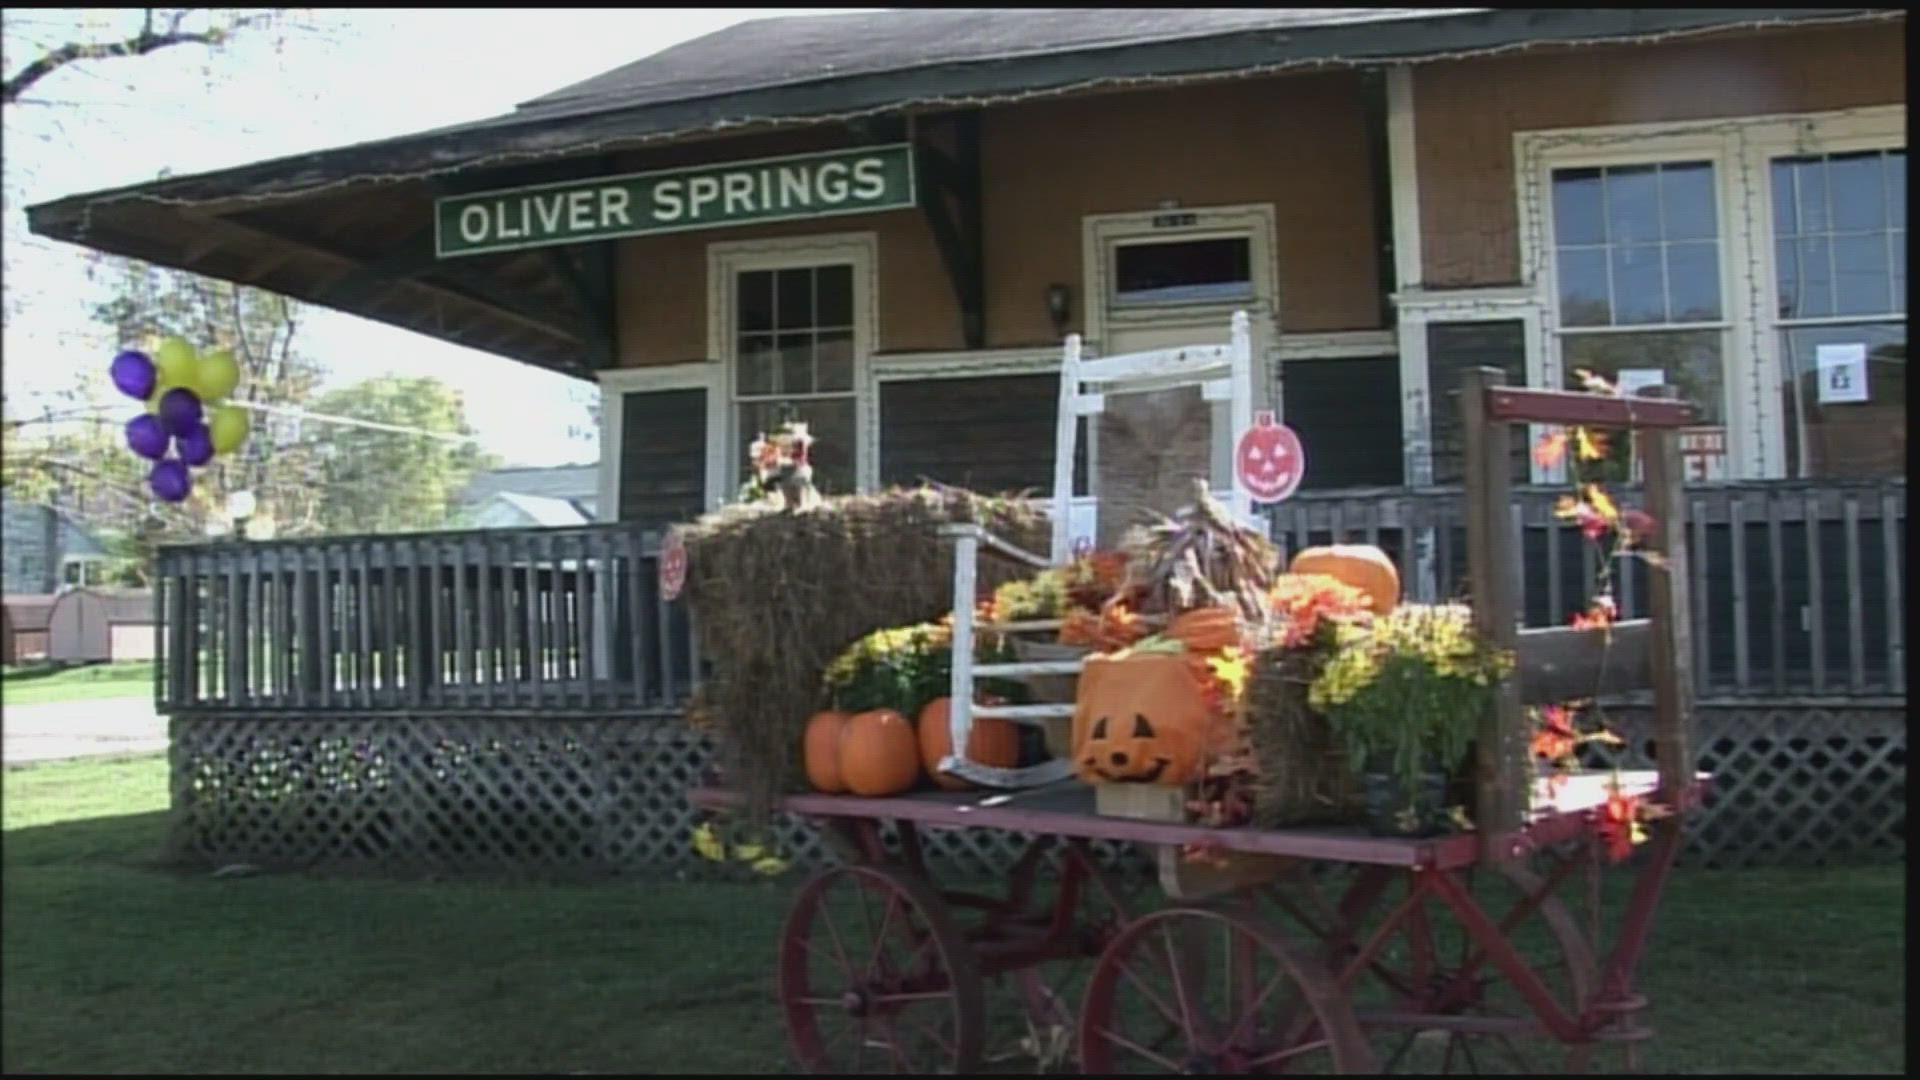 Oliver Springs was settled more than 200 years ago in 1821. The town was named after its first postmaster, Richard Oliver.